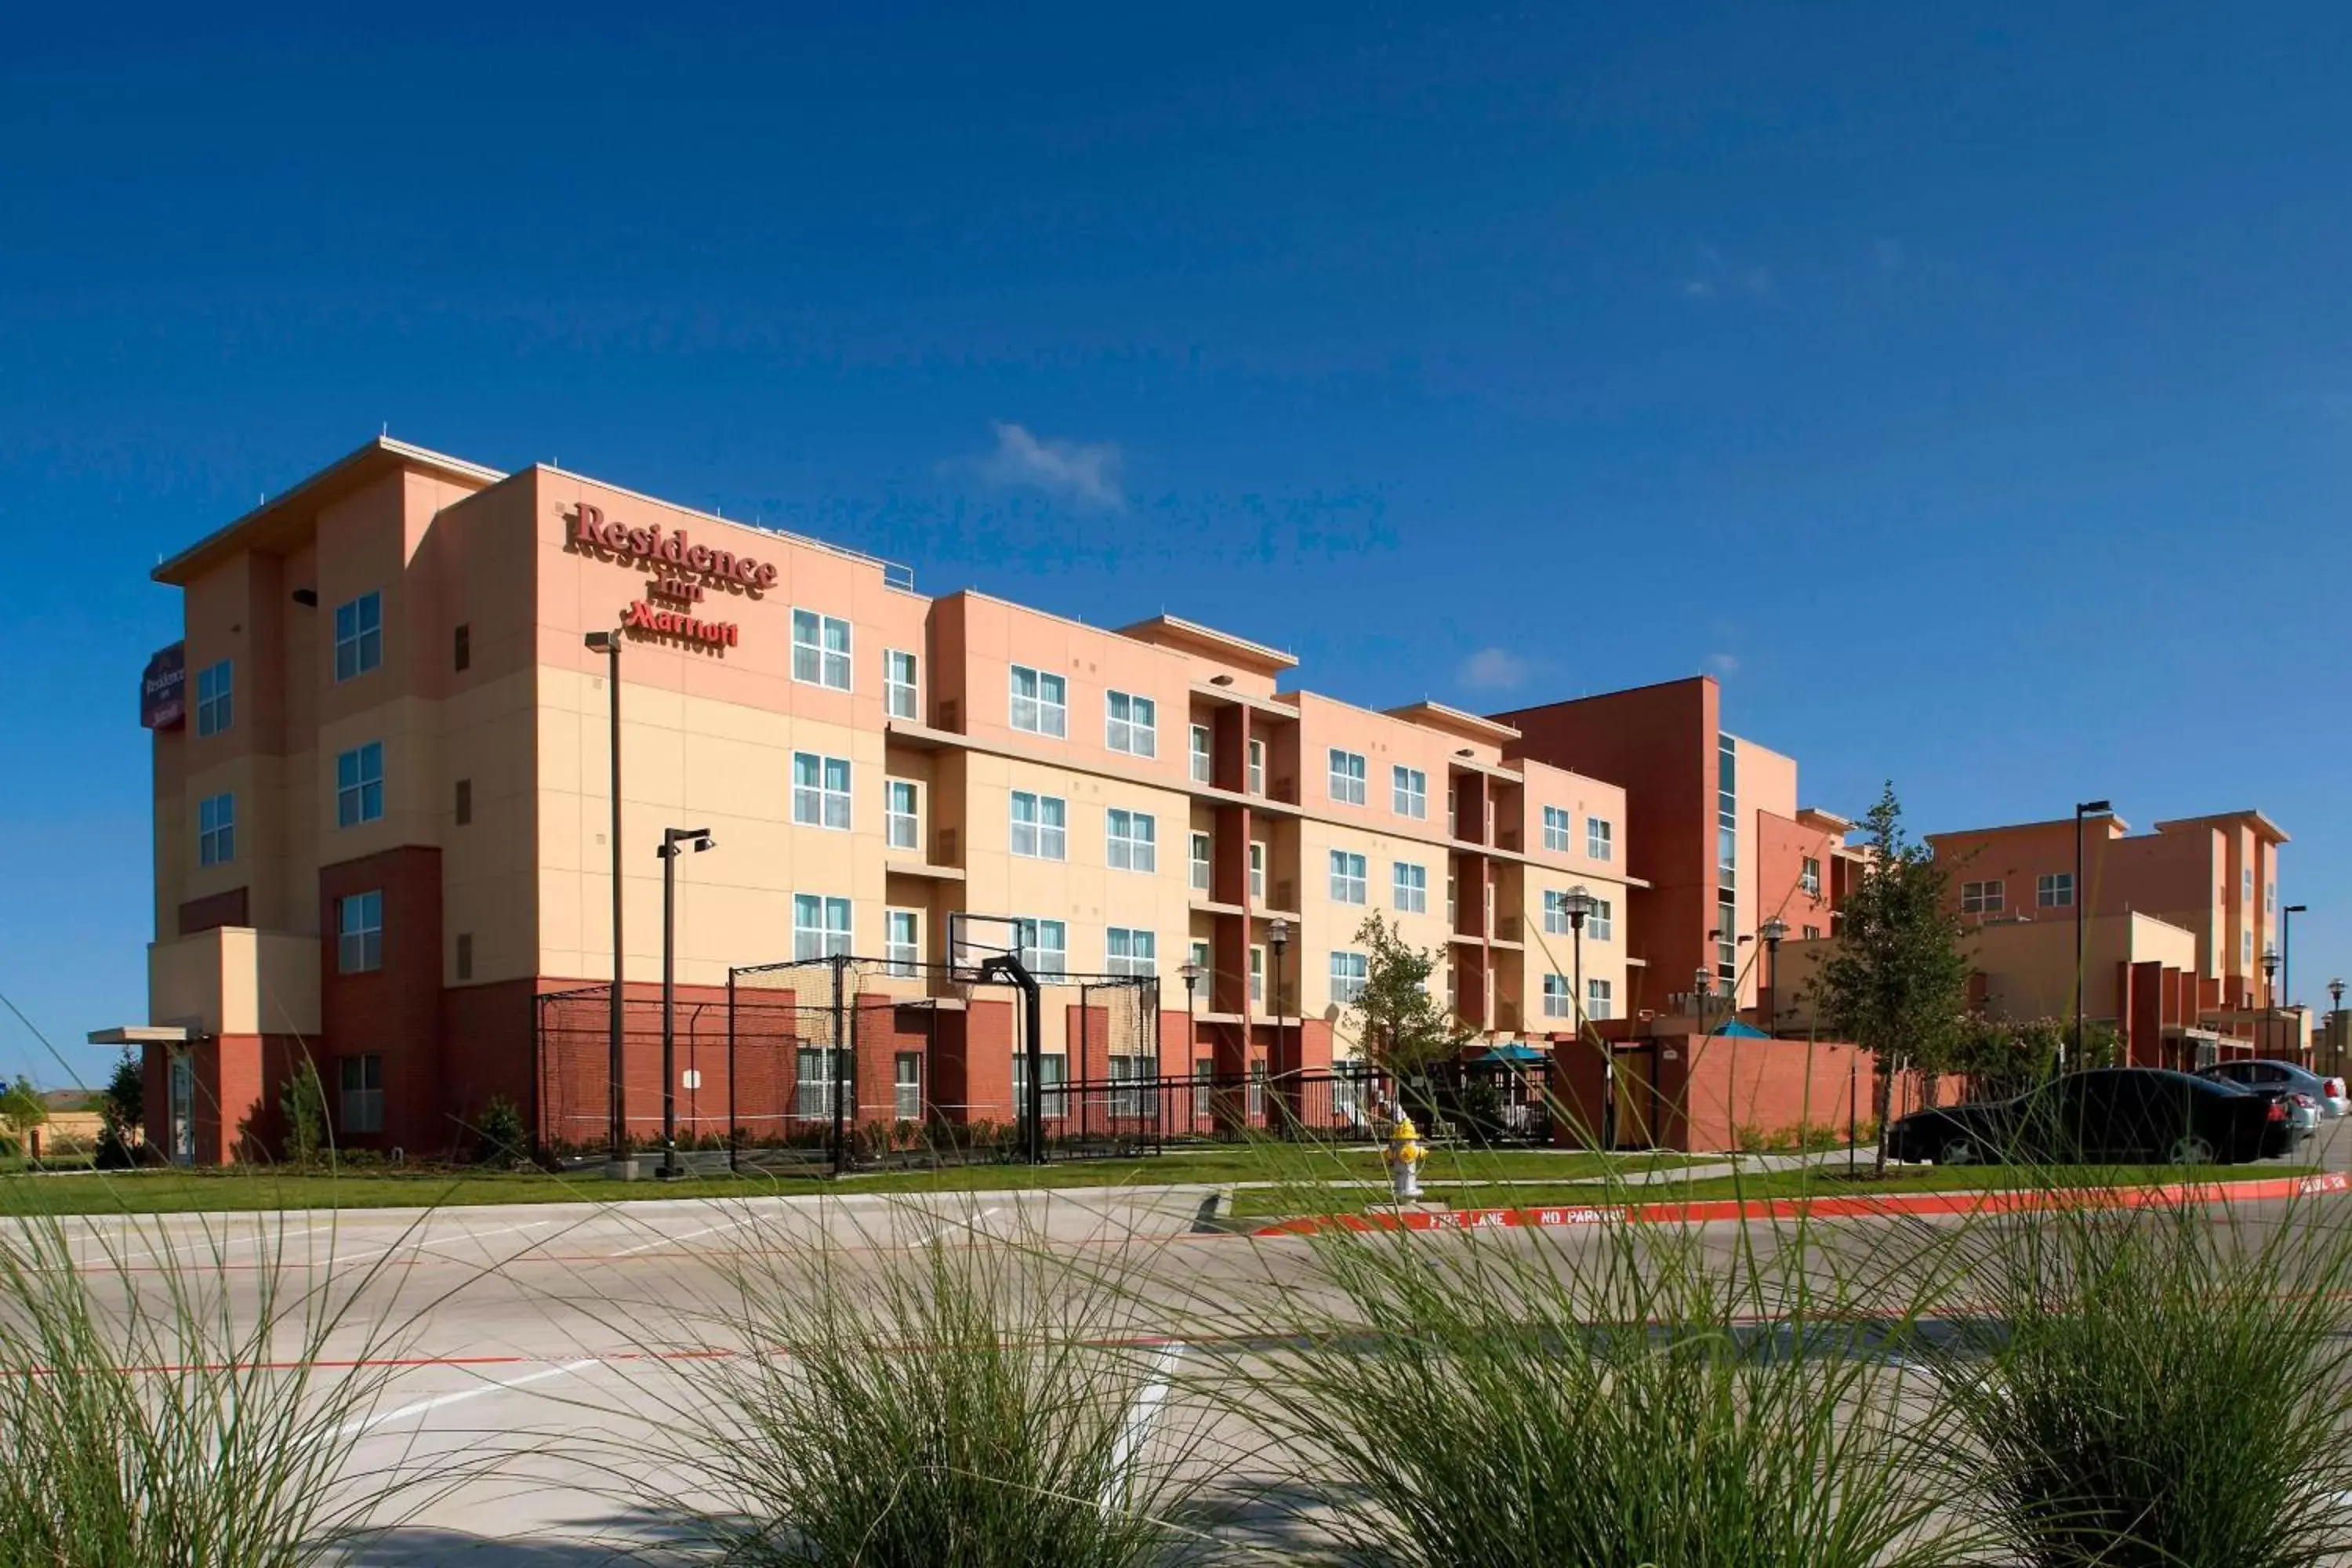 Property Building in Residence Inn by Marriott Dallas Plano The Colony